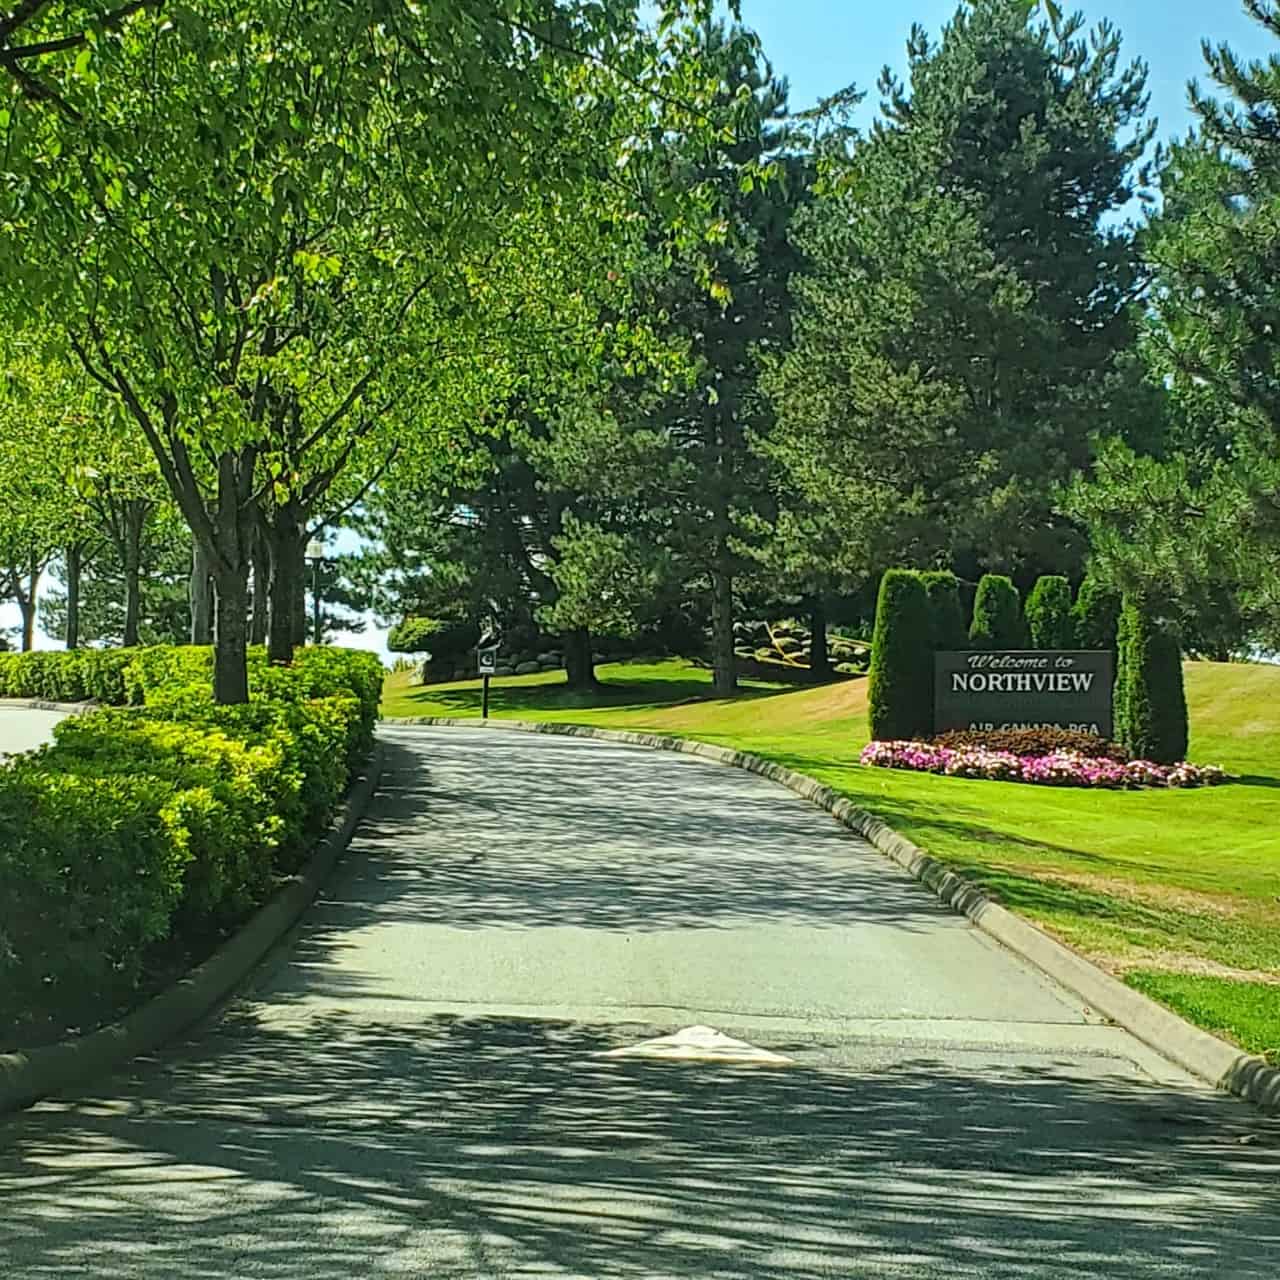 Welcome to Northview Golf Course  - I always look forward to lunch or an afternoon coffee with dessert at Duffey's Sports Grill. It is in such a beautiful location and the grounds are lovely. 